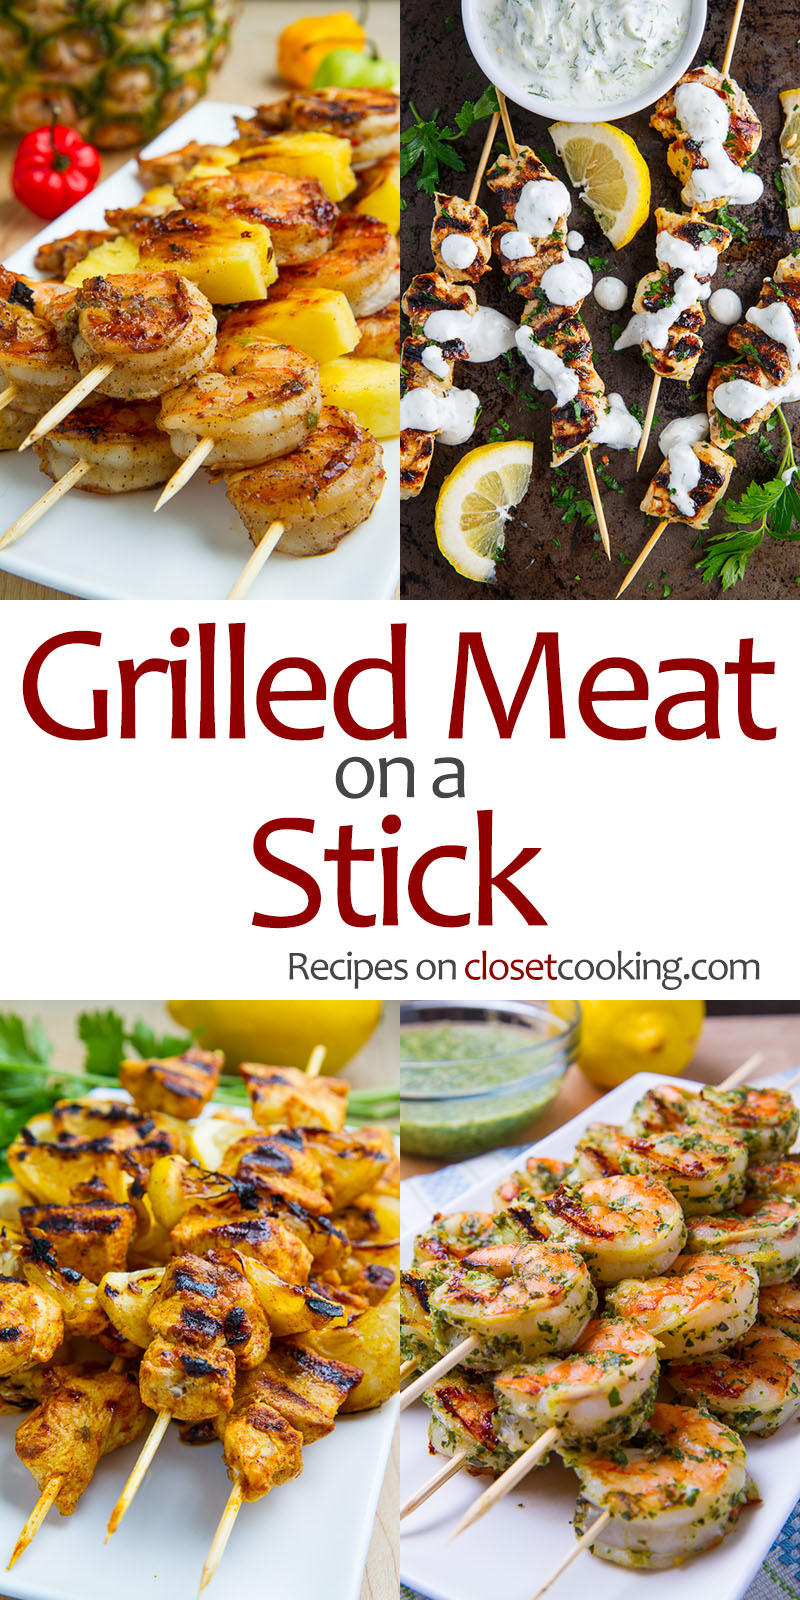 Grilled Meat on a Stick